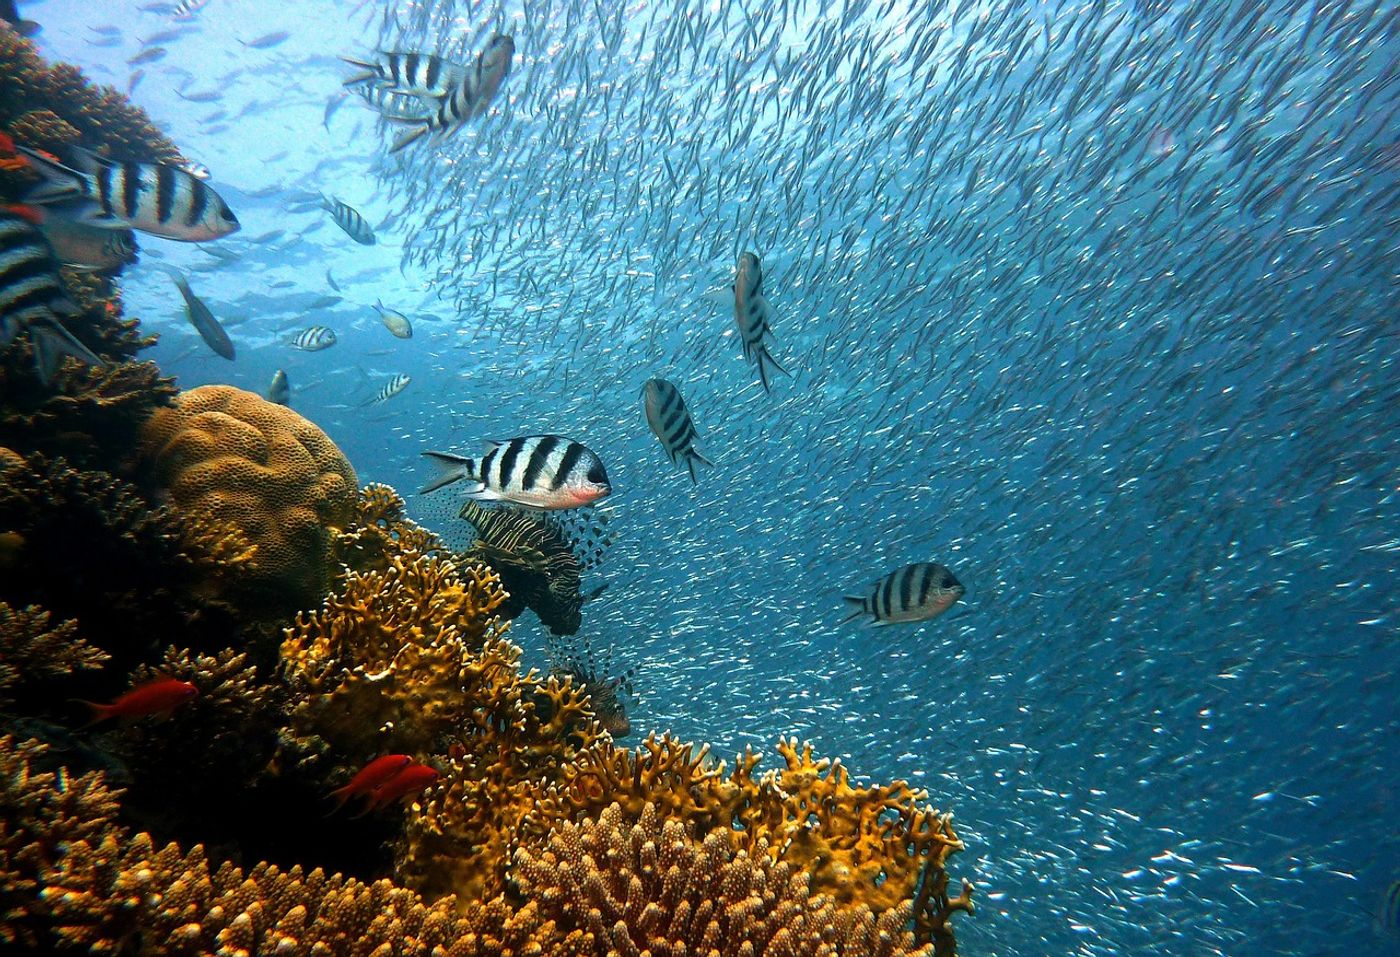 A coral reef is very important to the ocean's fish, and restoration efforts might help these fish thrive.